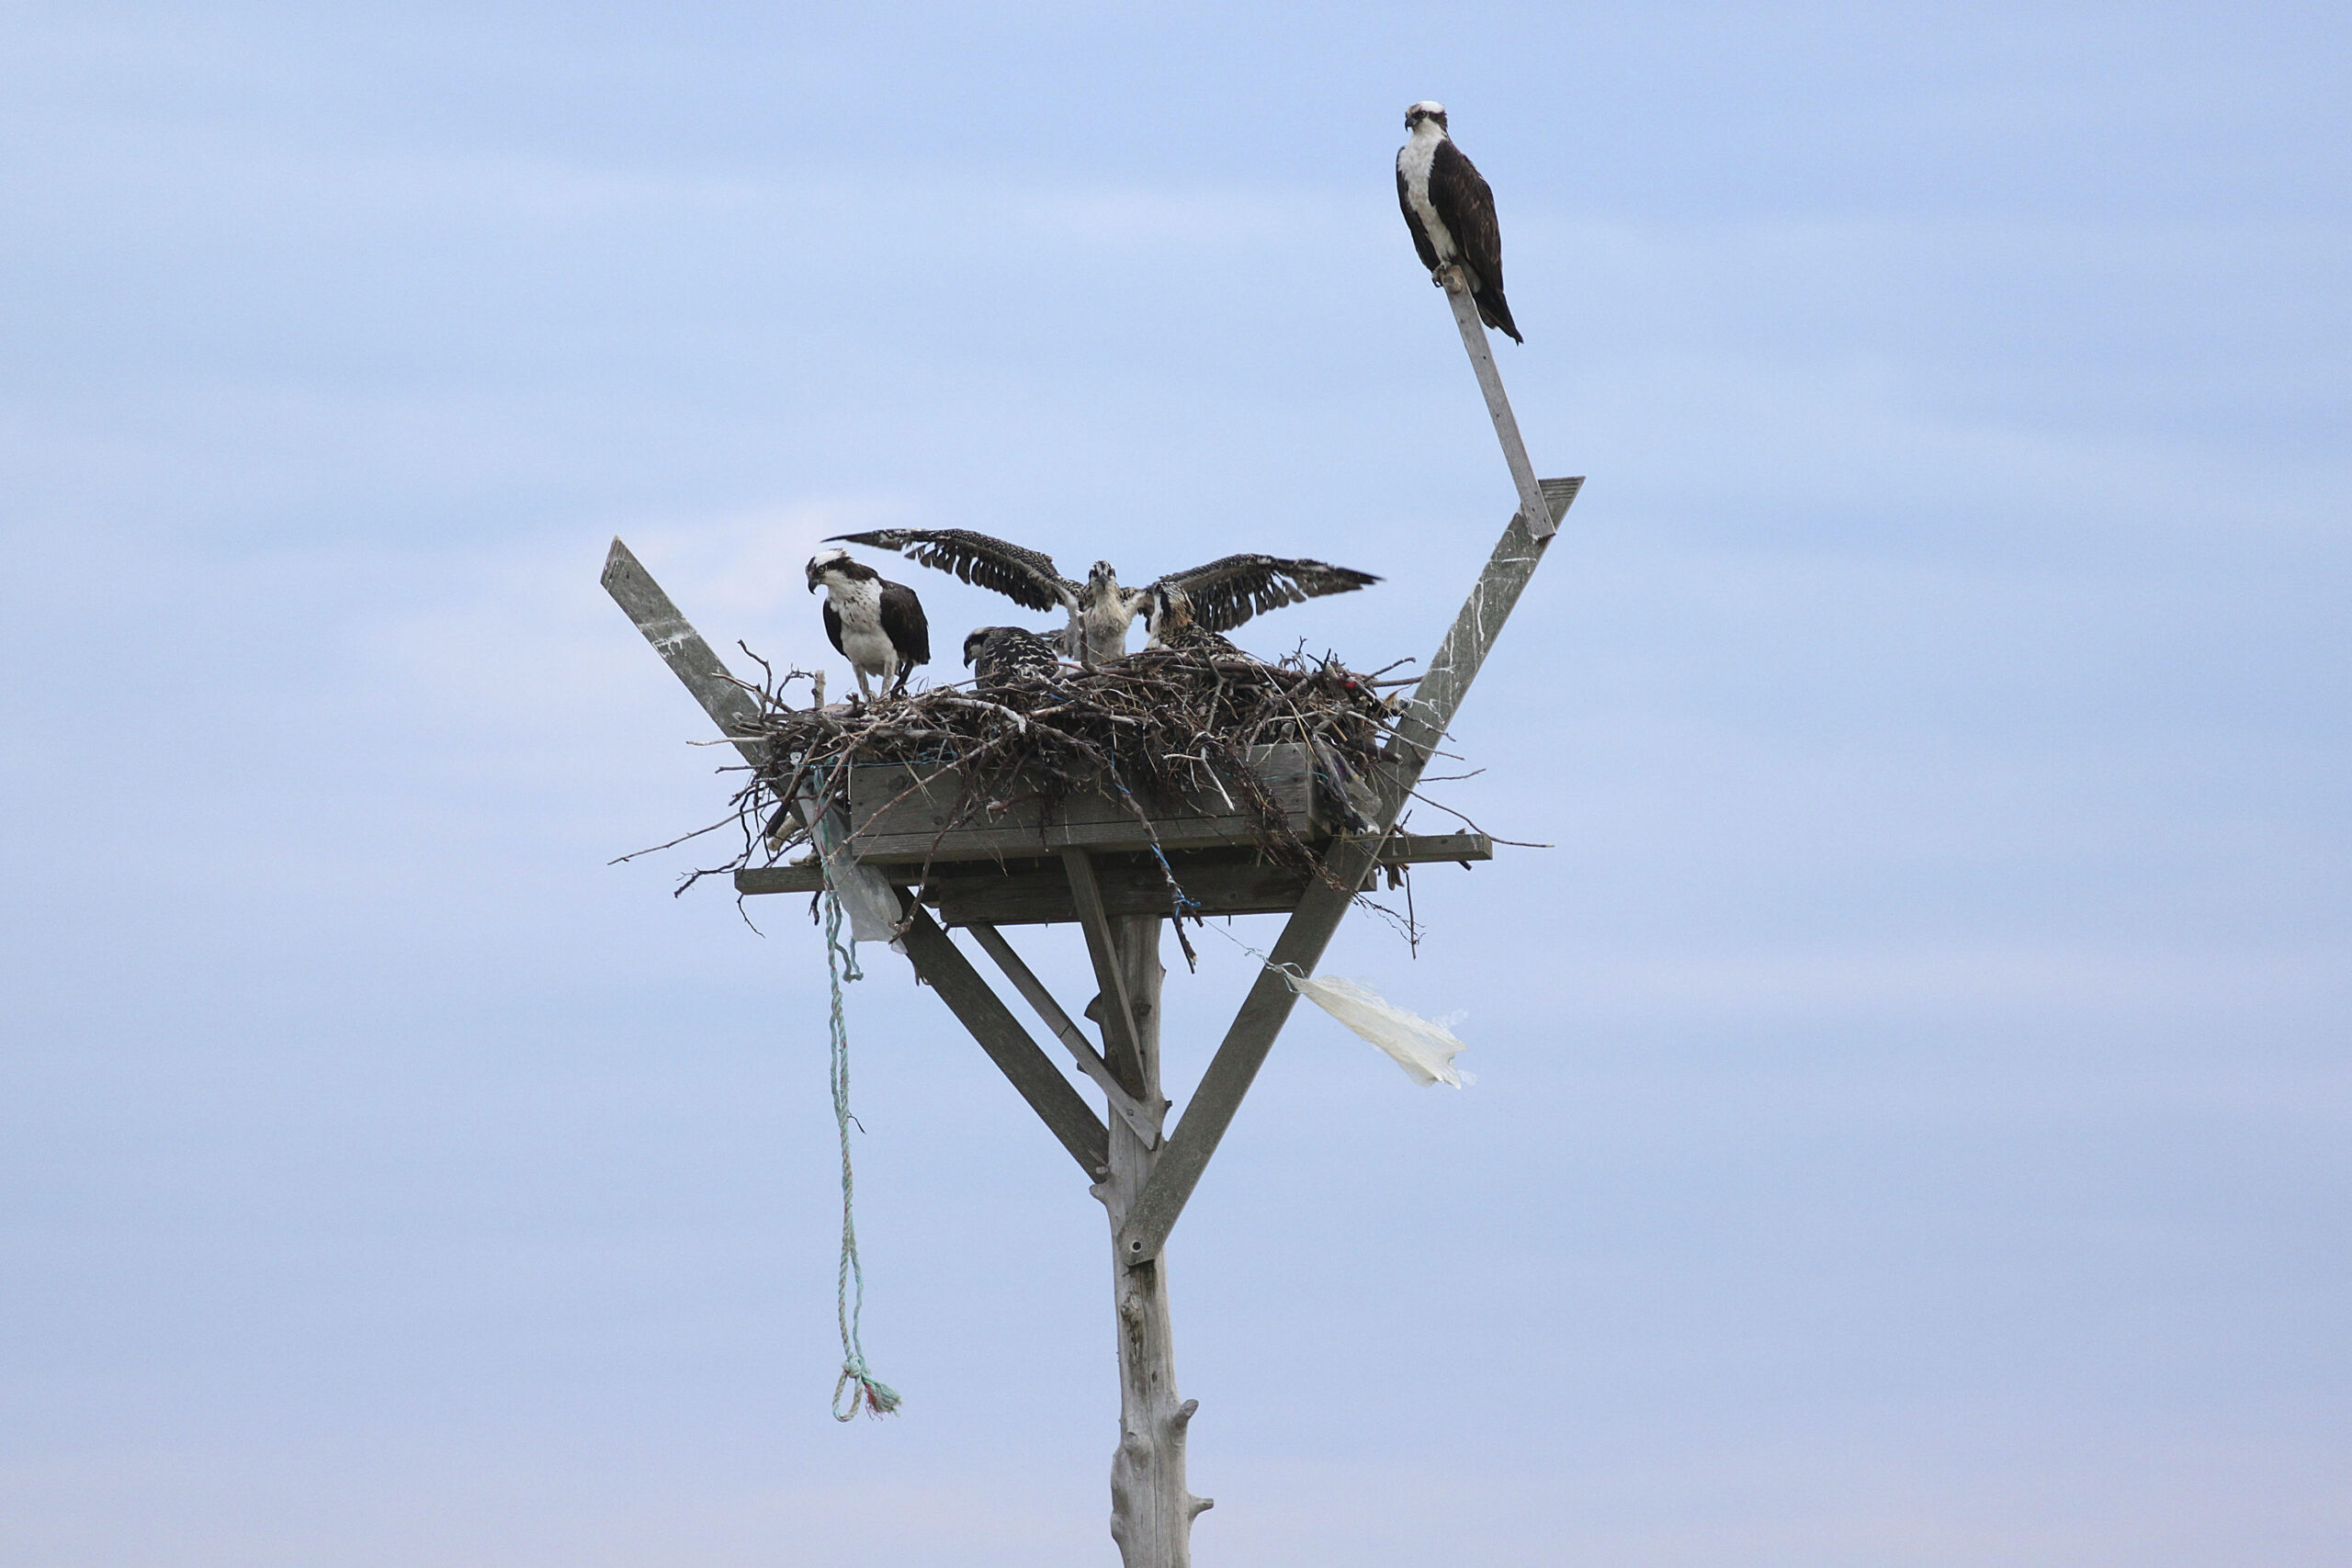 This past summer, the Group for the East End
monitored 477  osprey nesting sites in the five East End towns, documenting 353 active nesting pairs, which produced 505 fledglings.   DANA SHAW